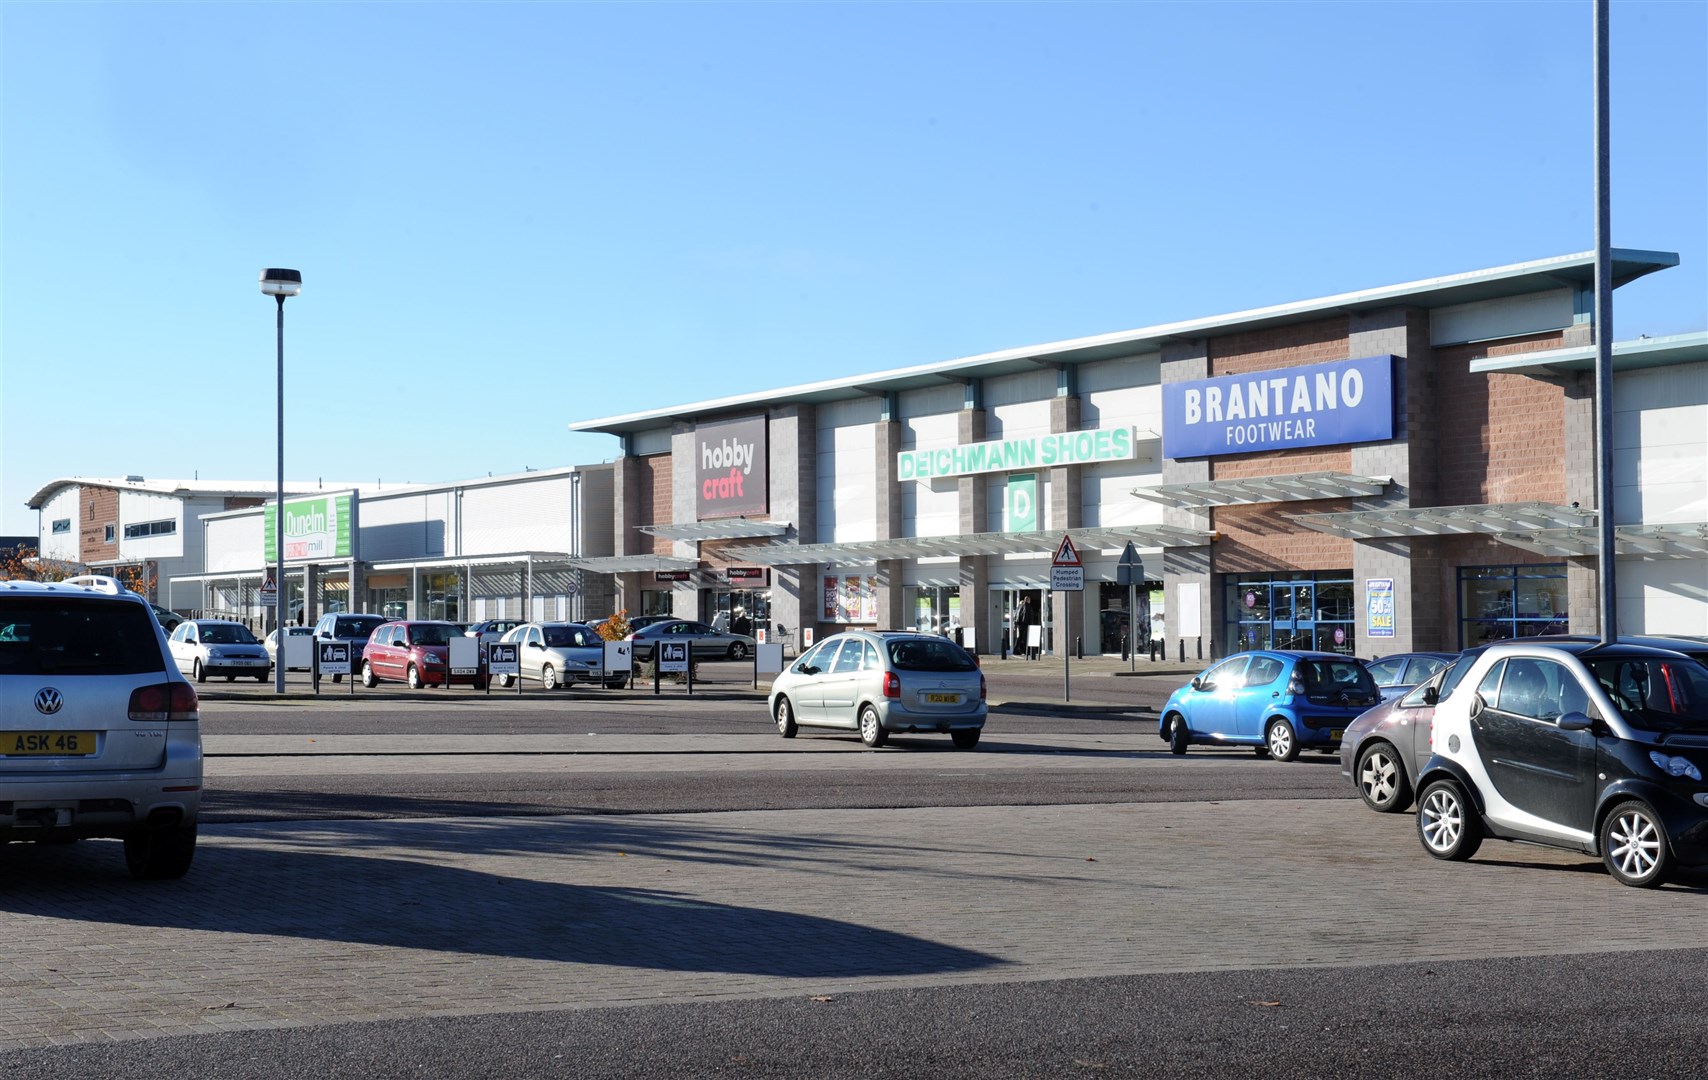 The former Brantano unit at Inches retail park in Inverness.